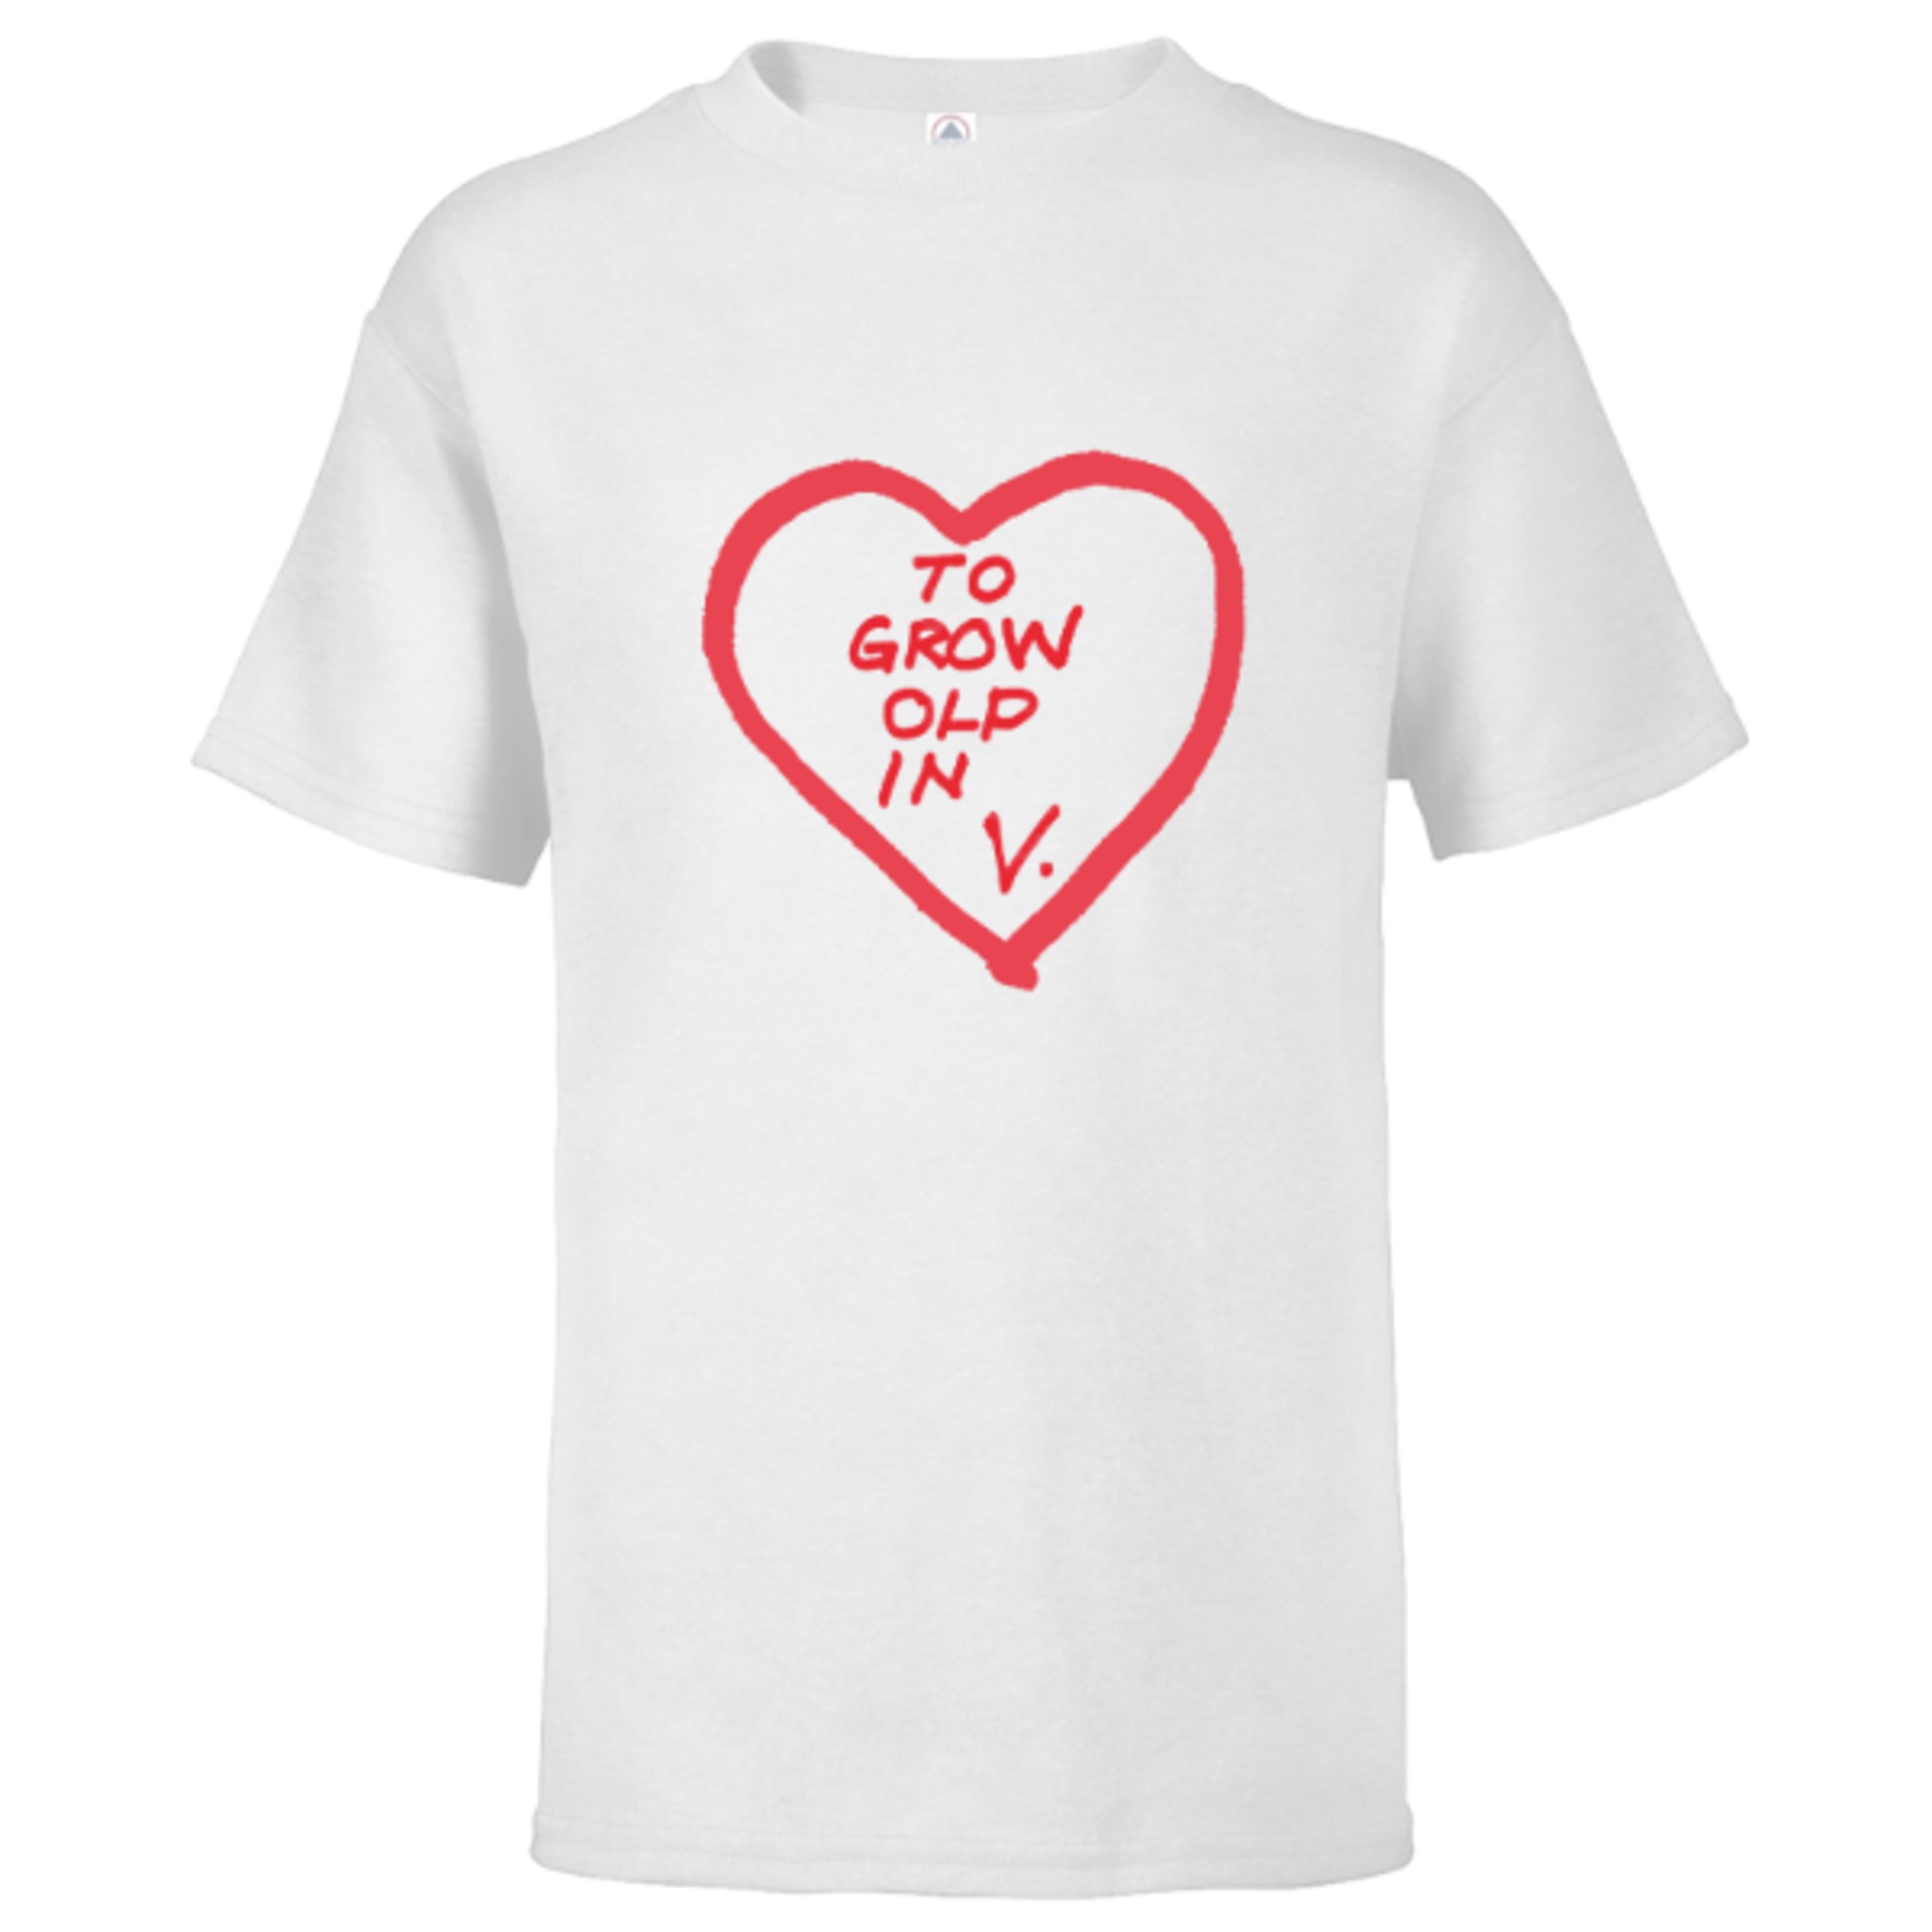 Marvel Grow Heather - Kids Heart Customized-Athletic Old In Vision T-Shirt - To for Sleeve Short WandaVision